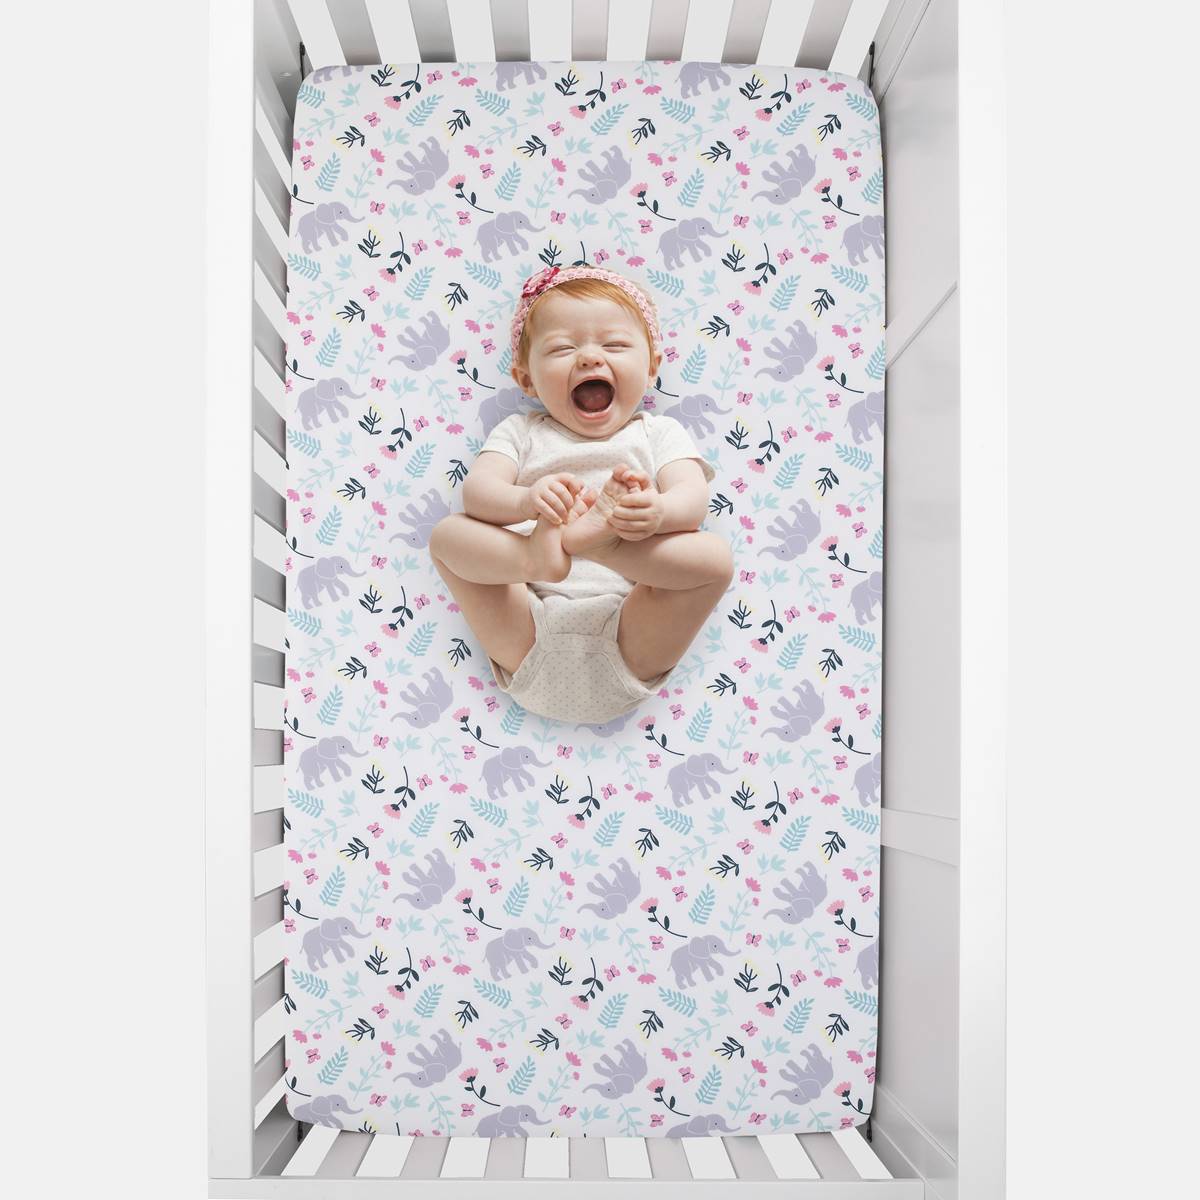 Carters(R) Floral Elephant Super Soft Fitted Crib Sheet